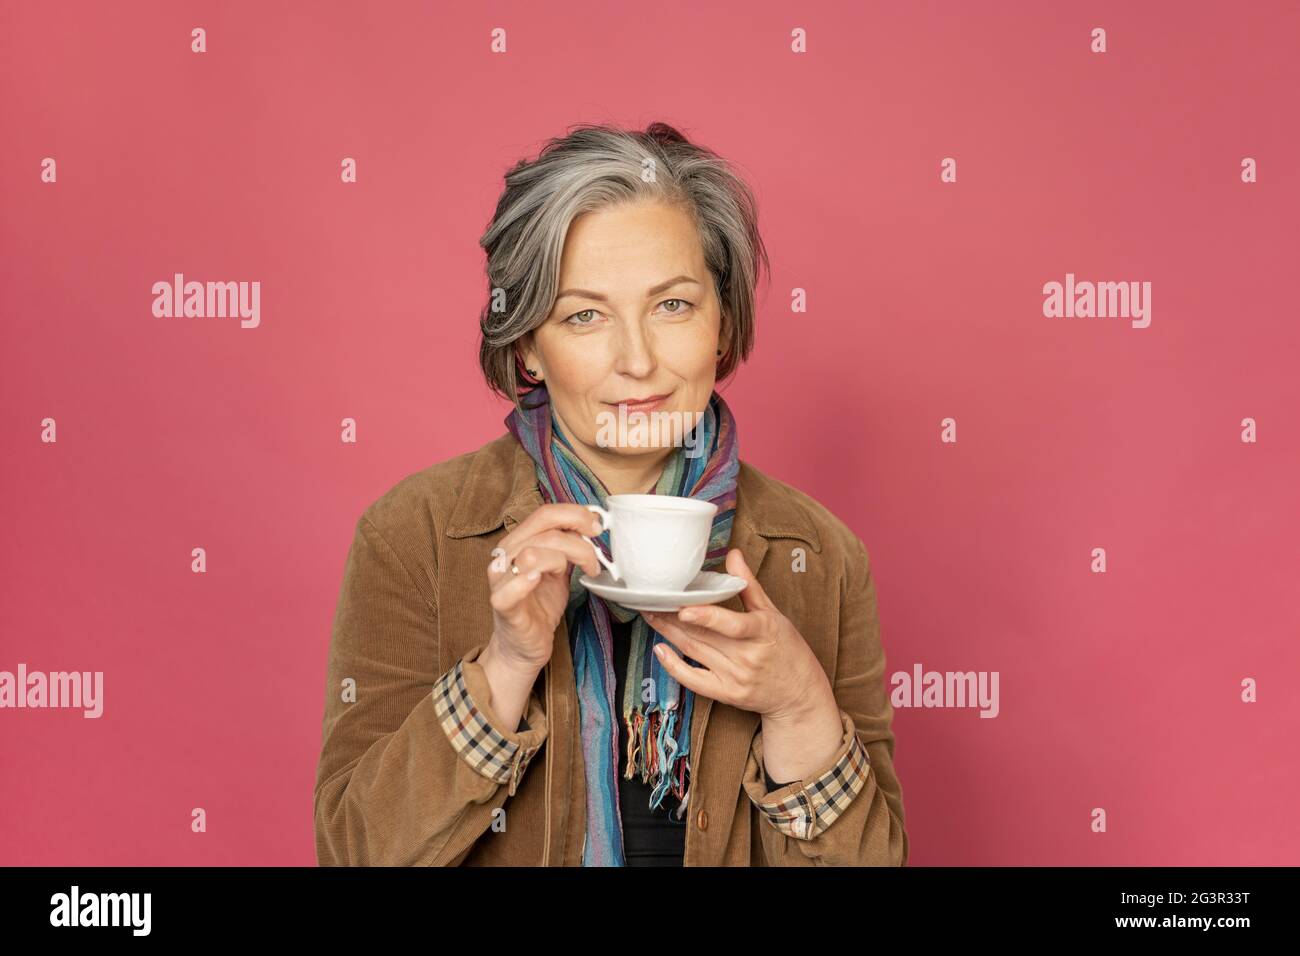 Charming Caucasian woman drinks coffee holding white cup. Pretty mature lady smiles slightly isolated on pink background. Beauty Stock Photo